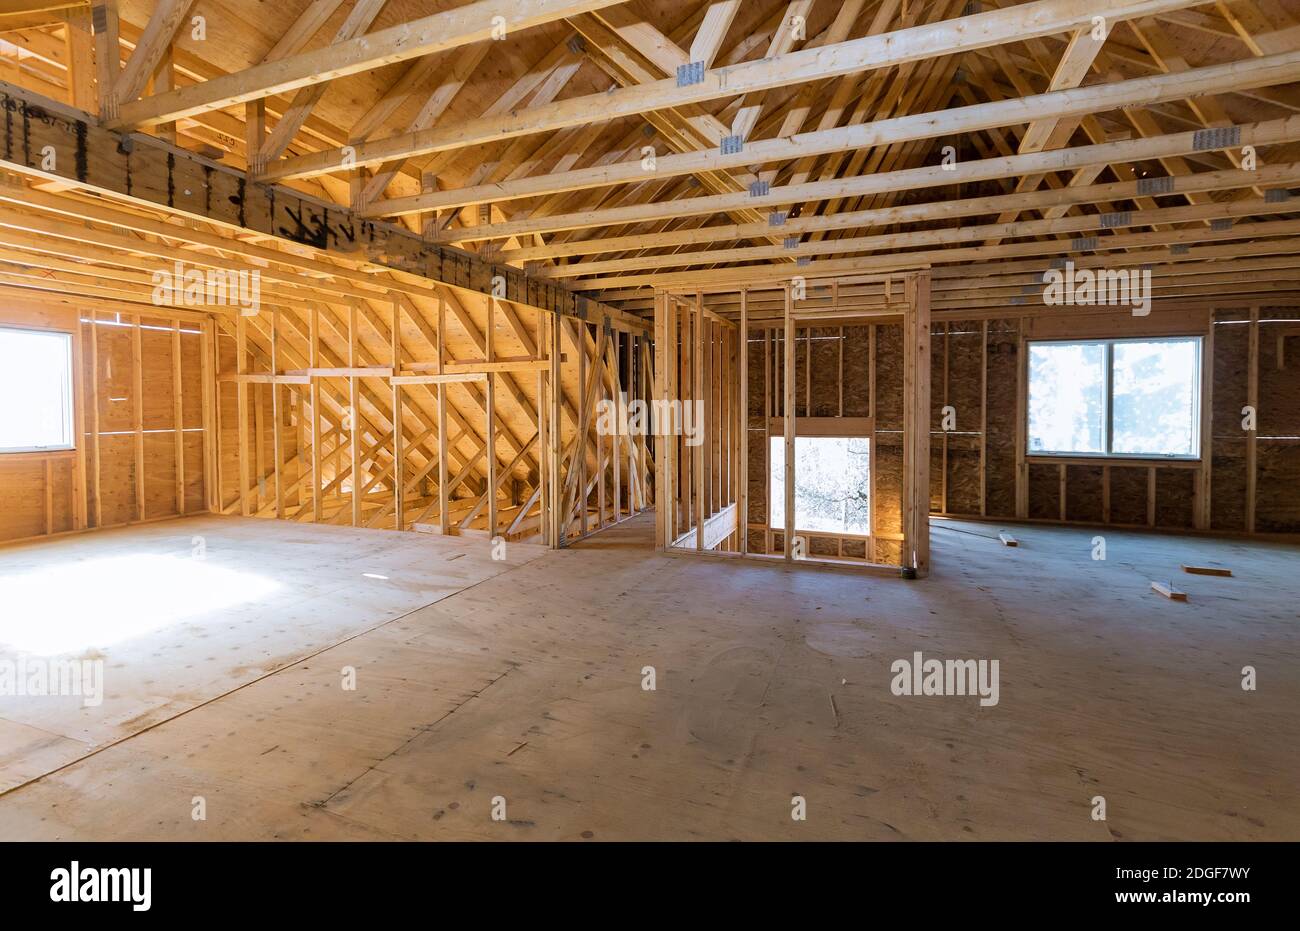 Beam built home under construction with wooden truss, post and beam framework frame house Stock Photo